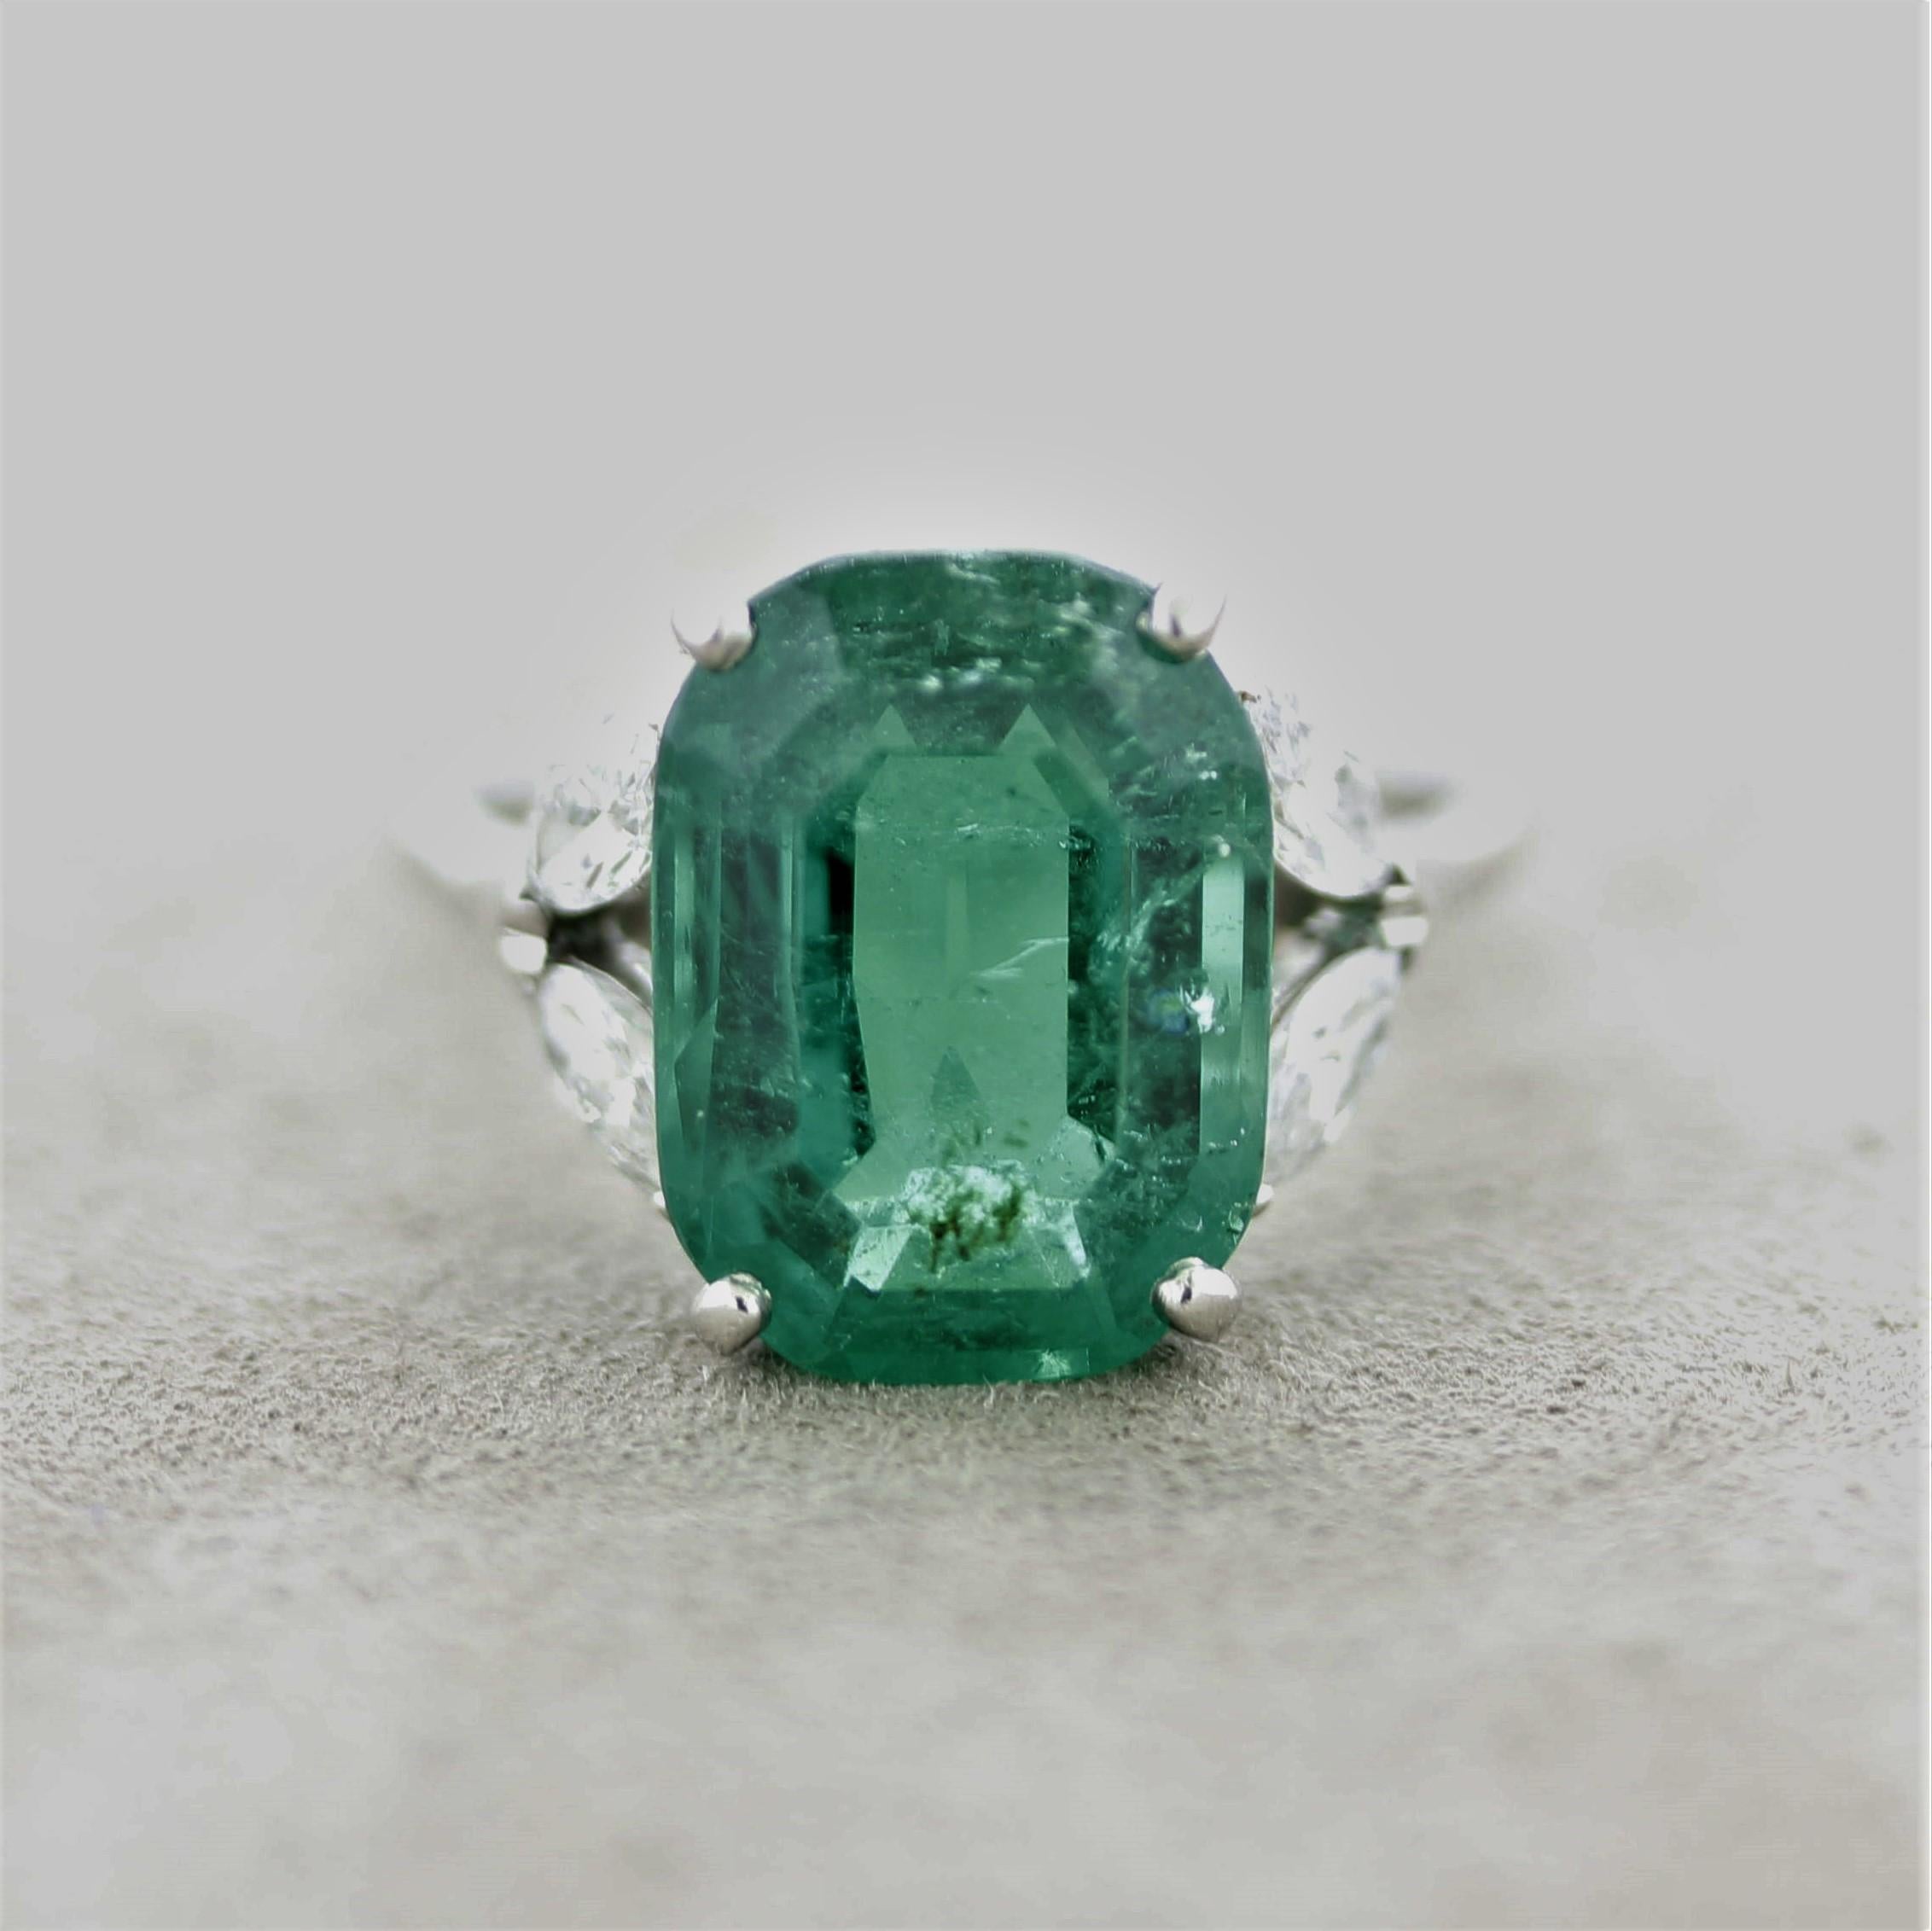 A majestic emerald takes center stage of this Cartier platinum ring. The emerald weighs 7.12 carats and has a bright vivid green color, a very fine quality stone. It is certified by the SSEF, the top gem lab in Switzerland, as natural with a Russian